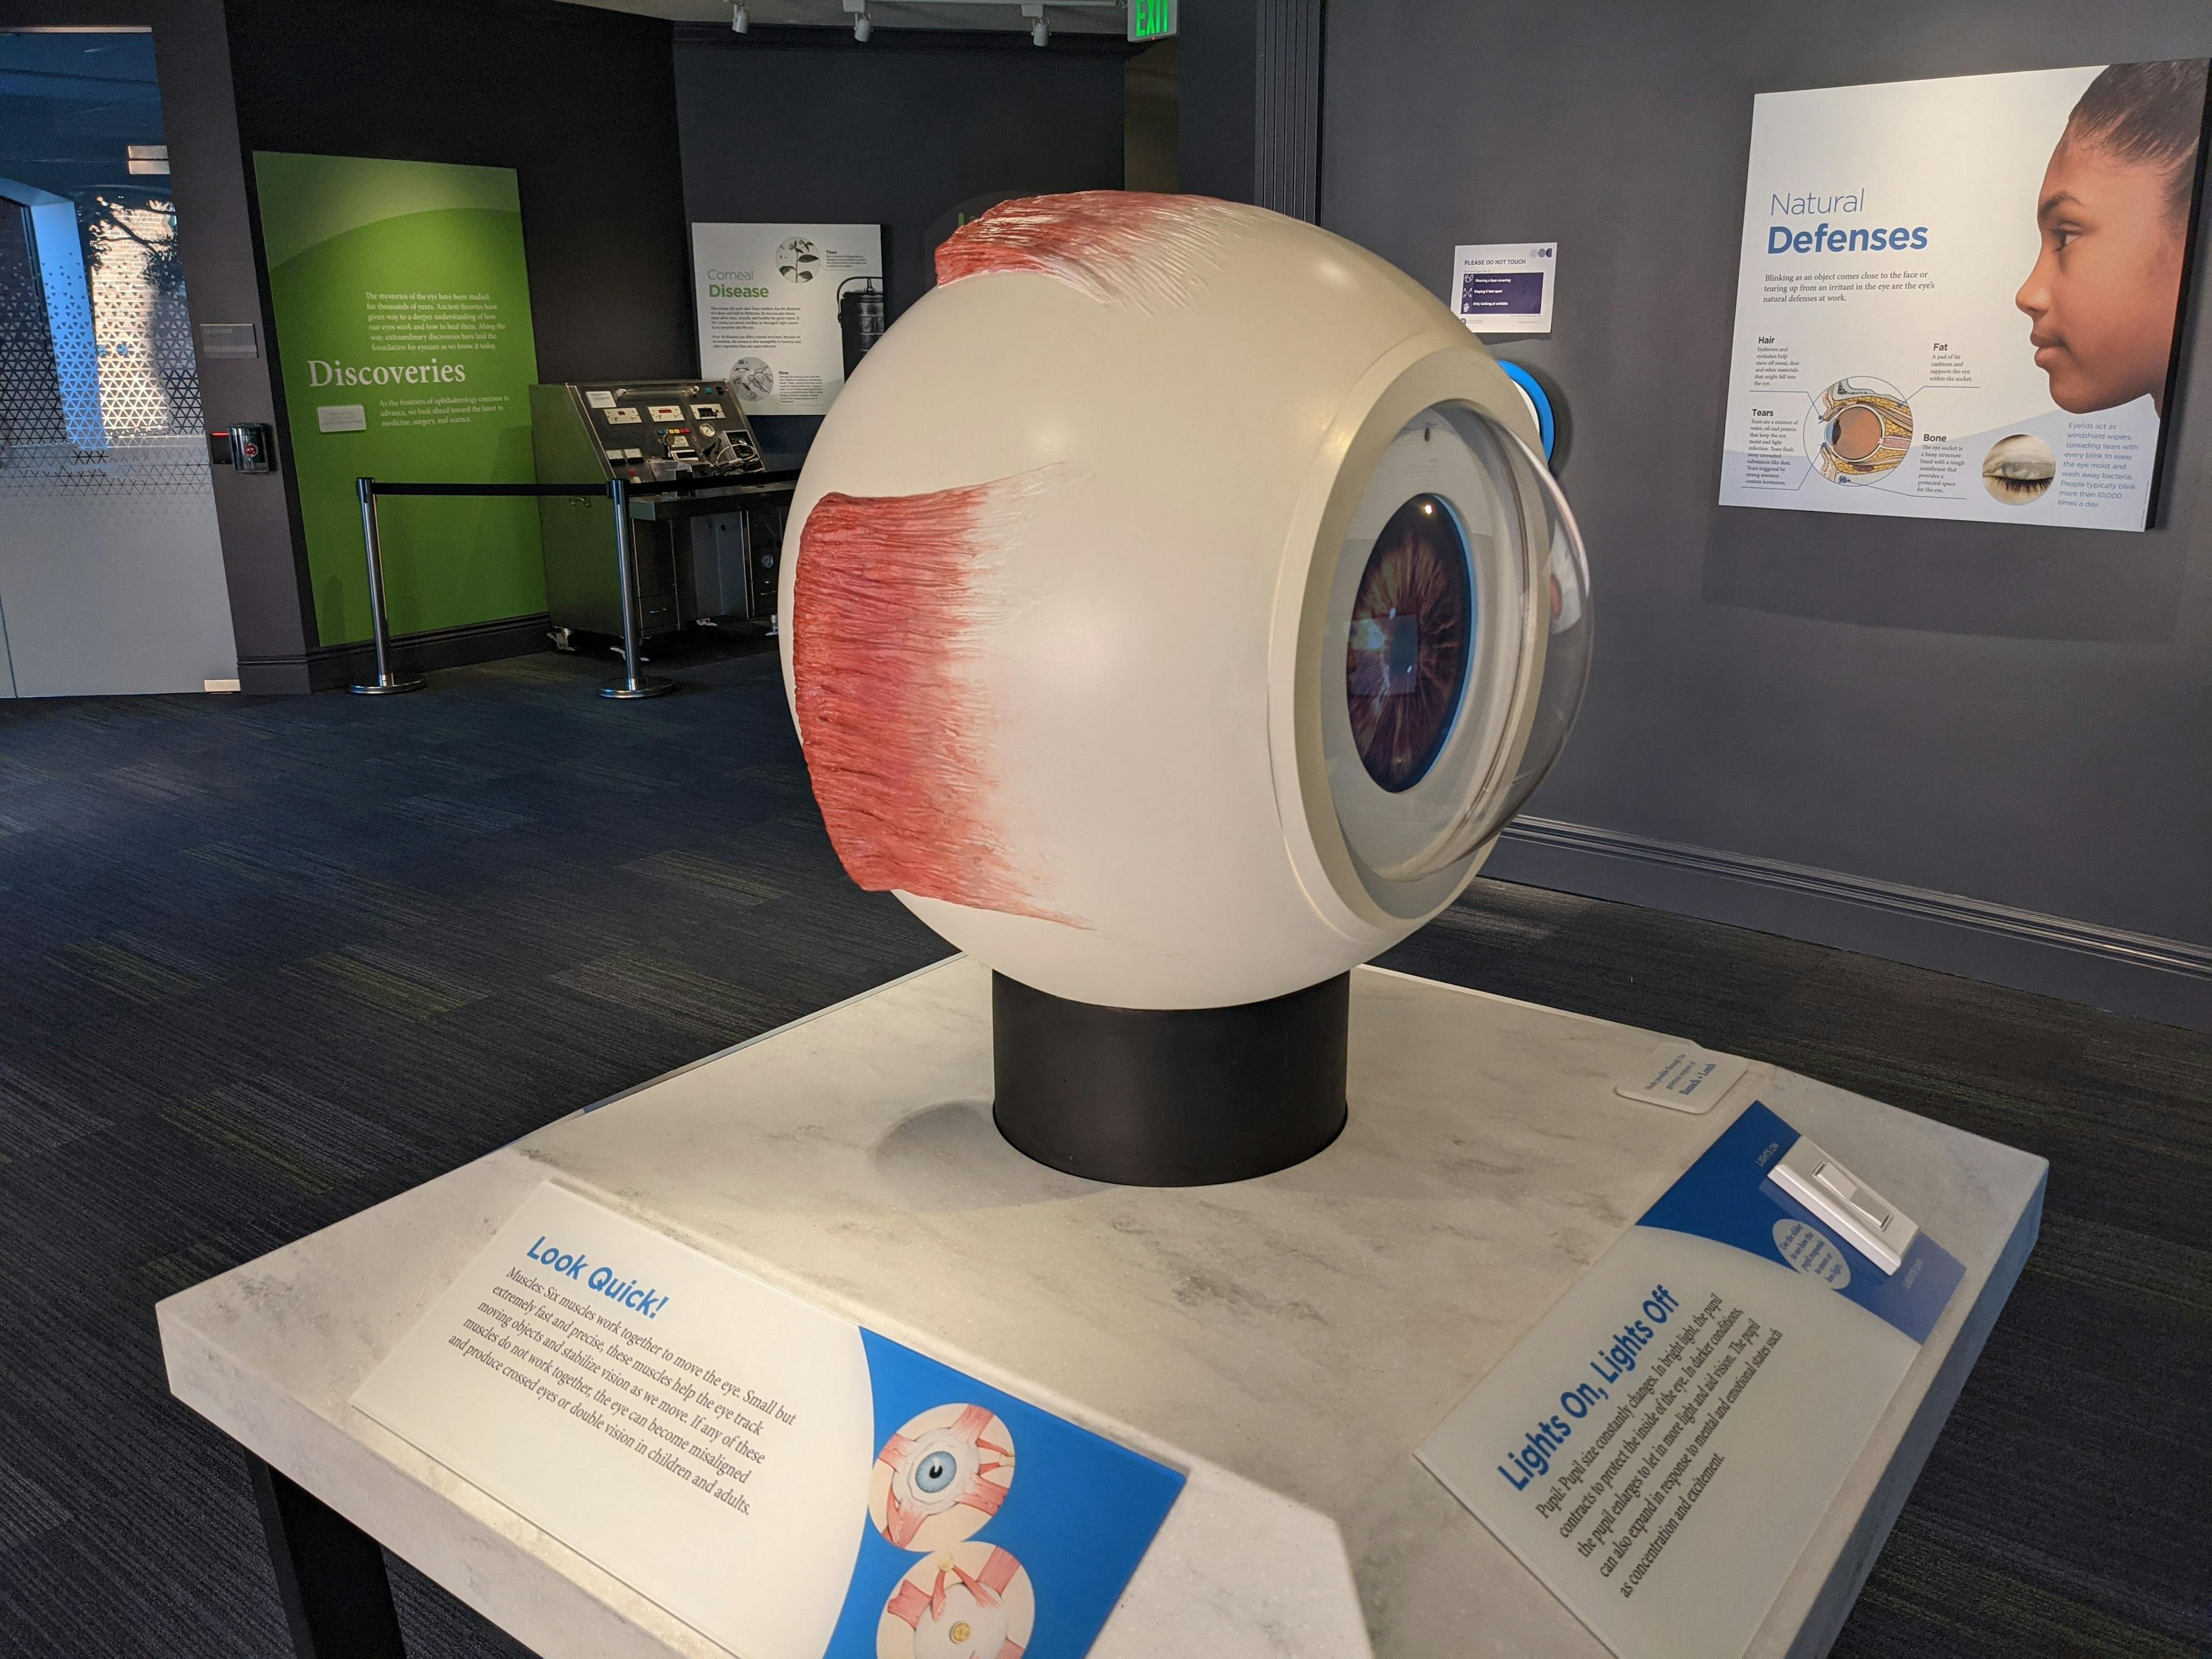 Displays at the Museum of the Eye include a model of the human eye.